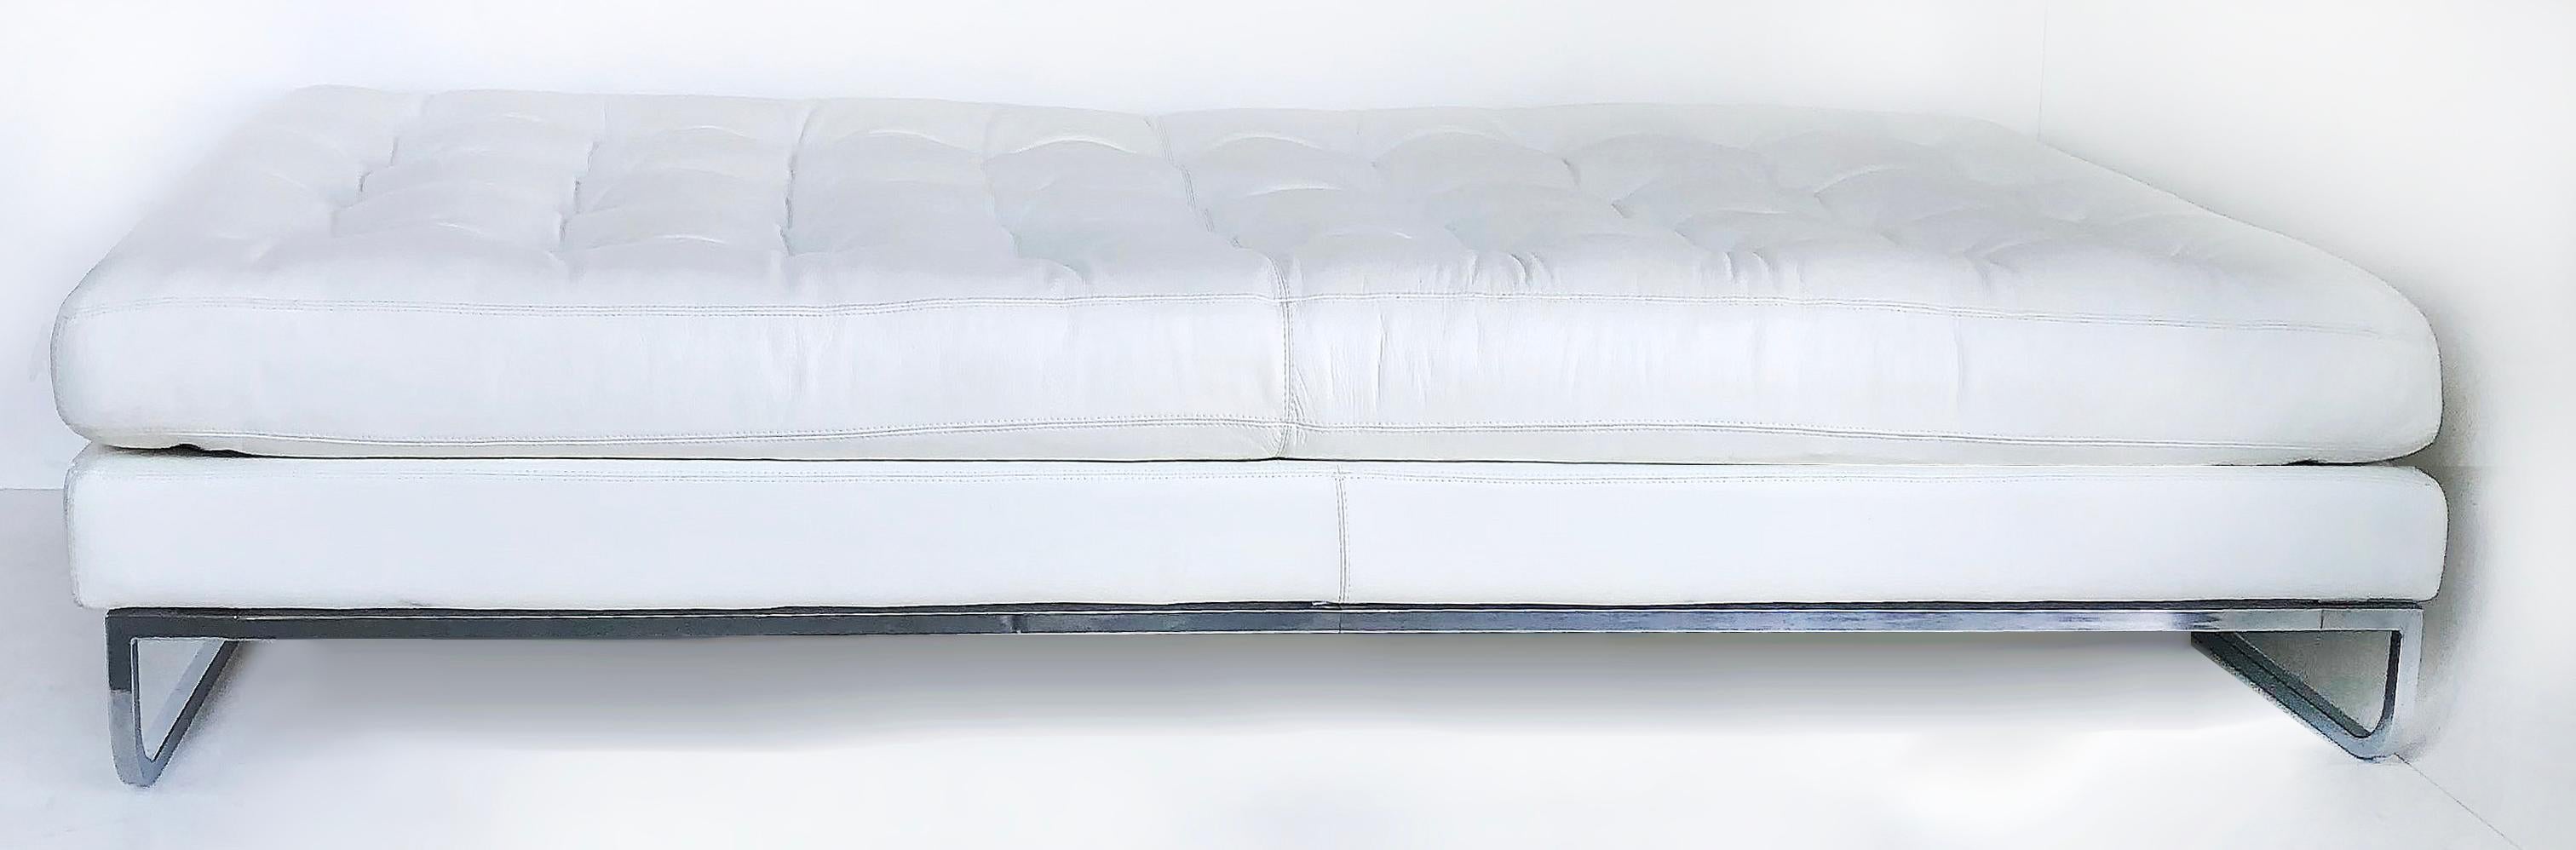 Valdichienti leather / stainless steel chaise longue w/bolster, Italy

Offered for sale is a high-end, soft, and buttery white leather and stainless steel Valdichienti of Italy chaise longue with a box-stitched white leather cushion and bolster